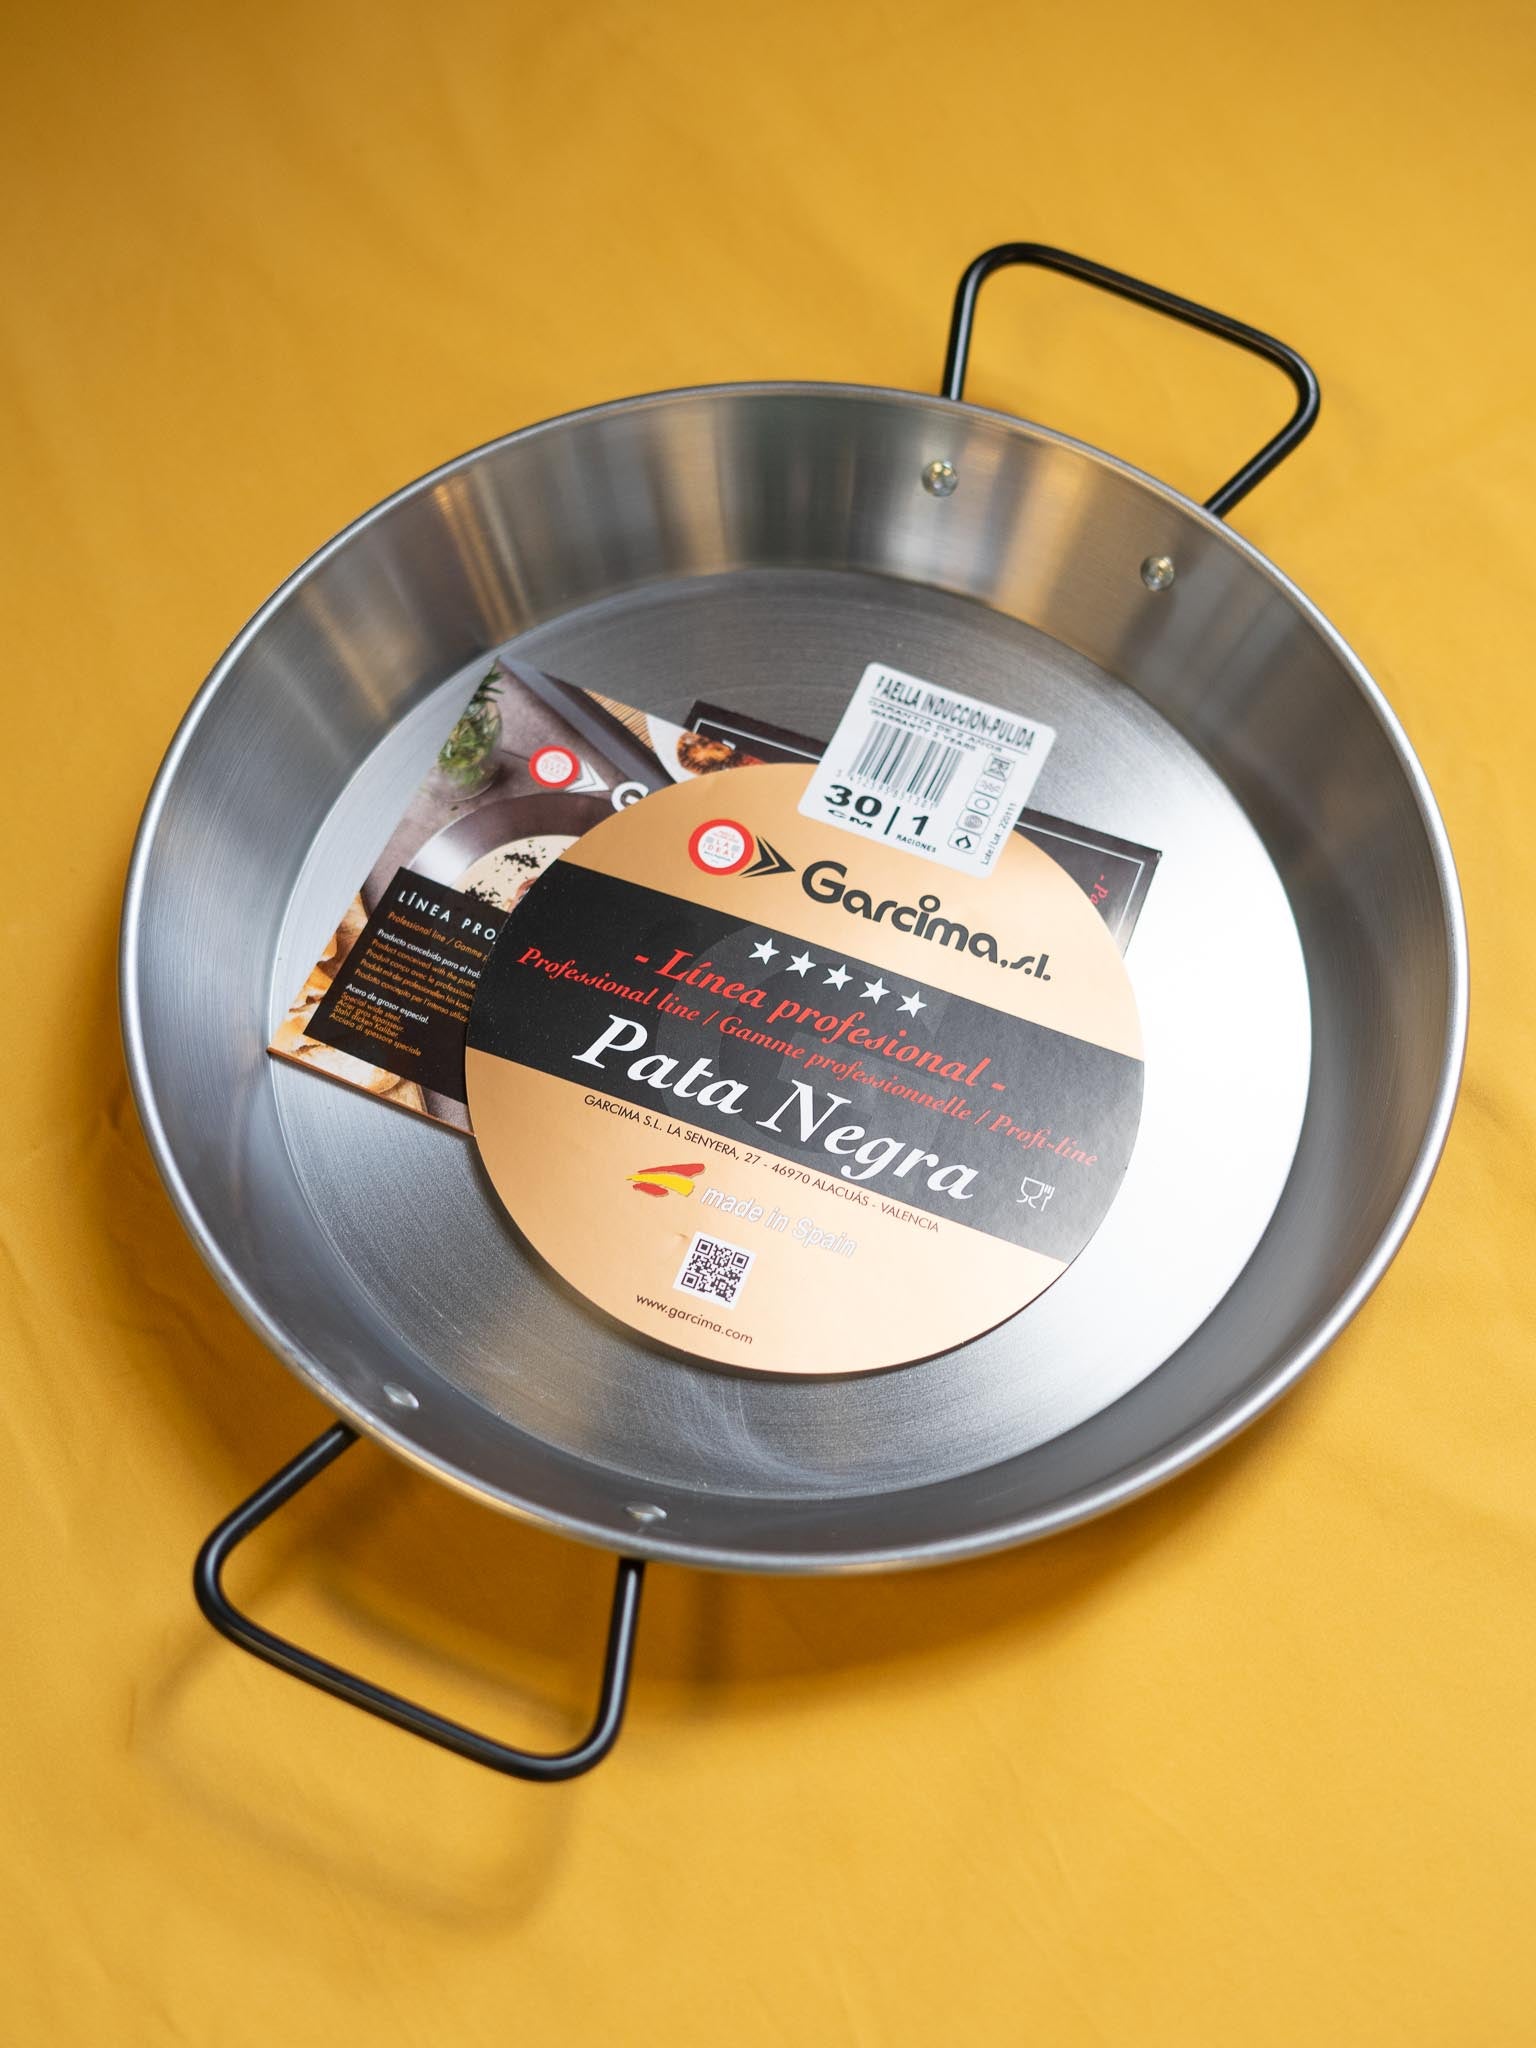 La Ideal 85130 Polished Steel Paella Pan, 30 cm, Brushed, Silver